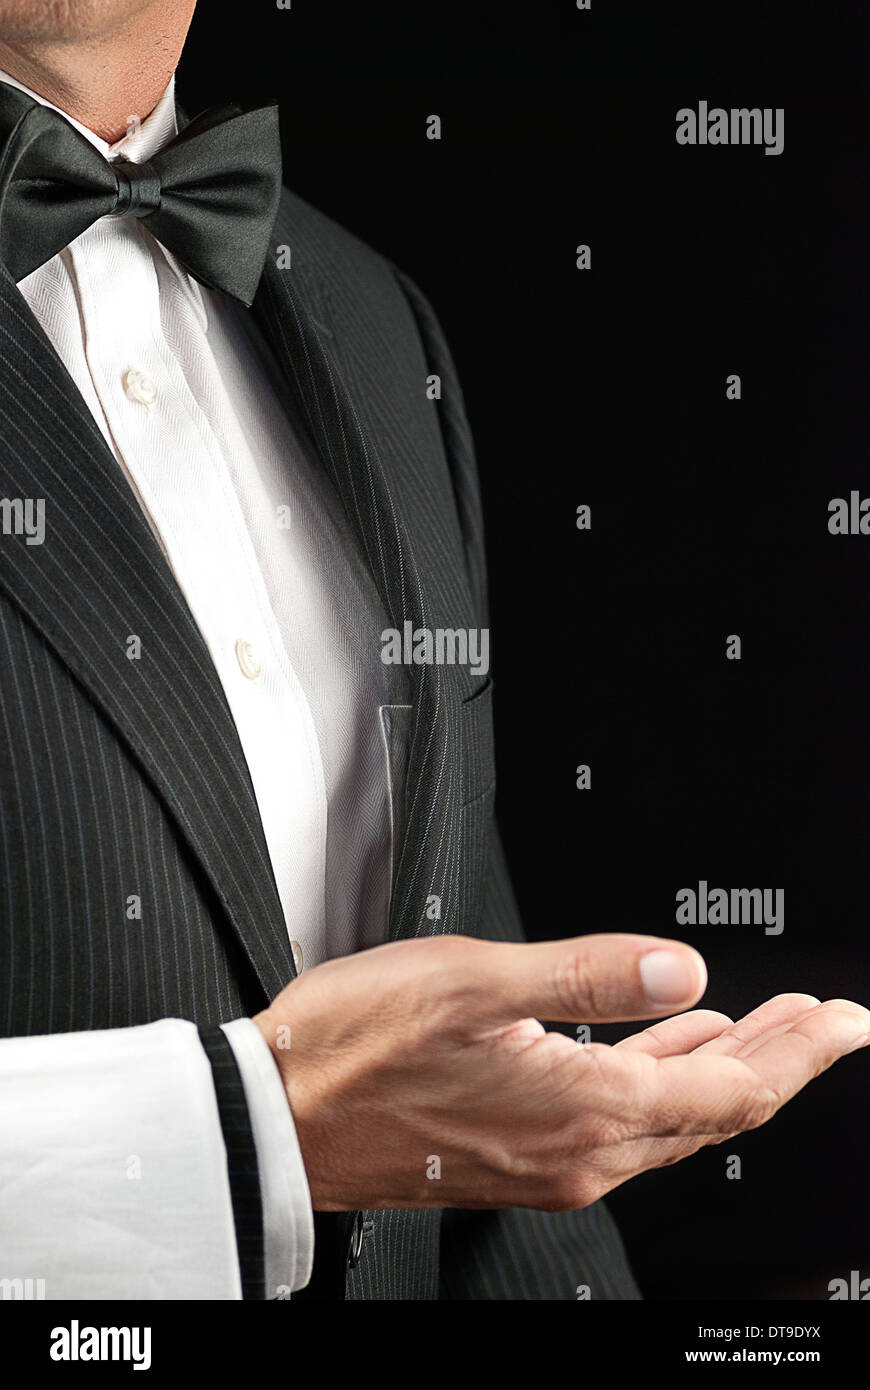 Close-up torso shot of a fine dining waiter in a bowtie and tux with a white pressed napkin over his arm, palm up. Stock Photo